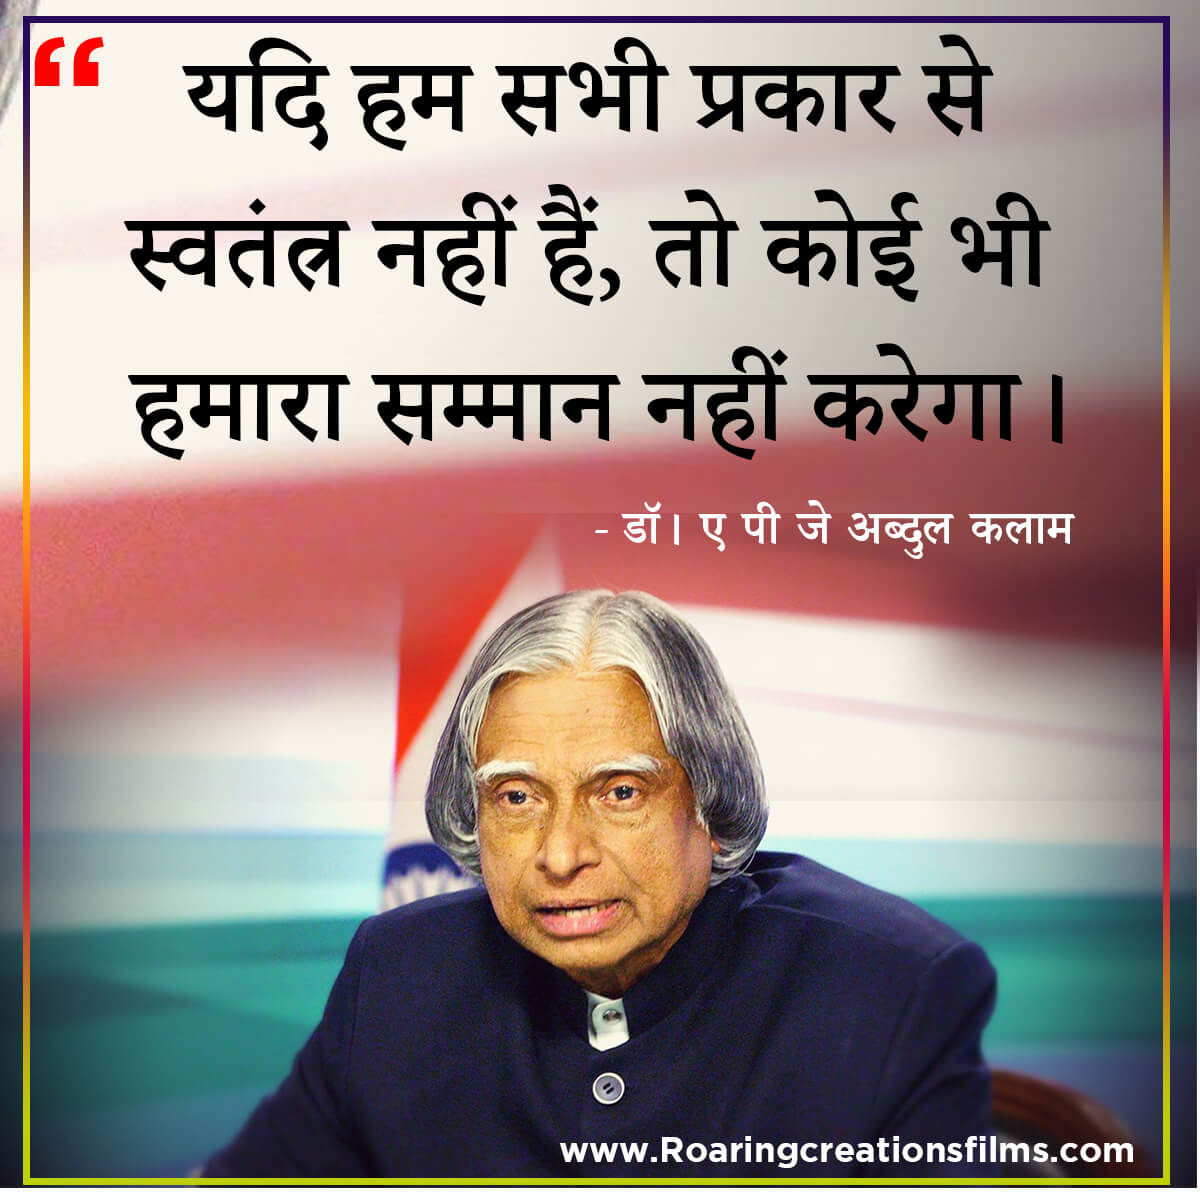 Best Quotes of Dr. A.P.J. Abdul Kalam in Hindi